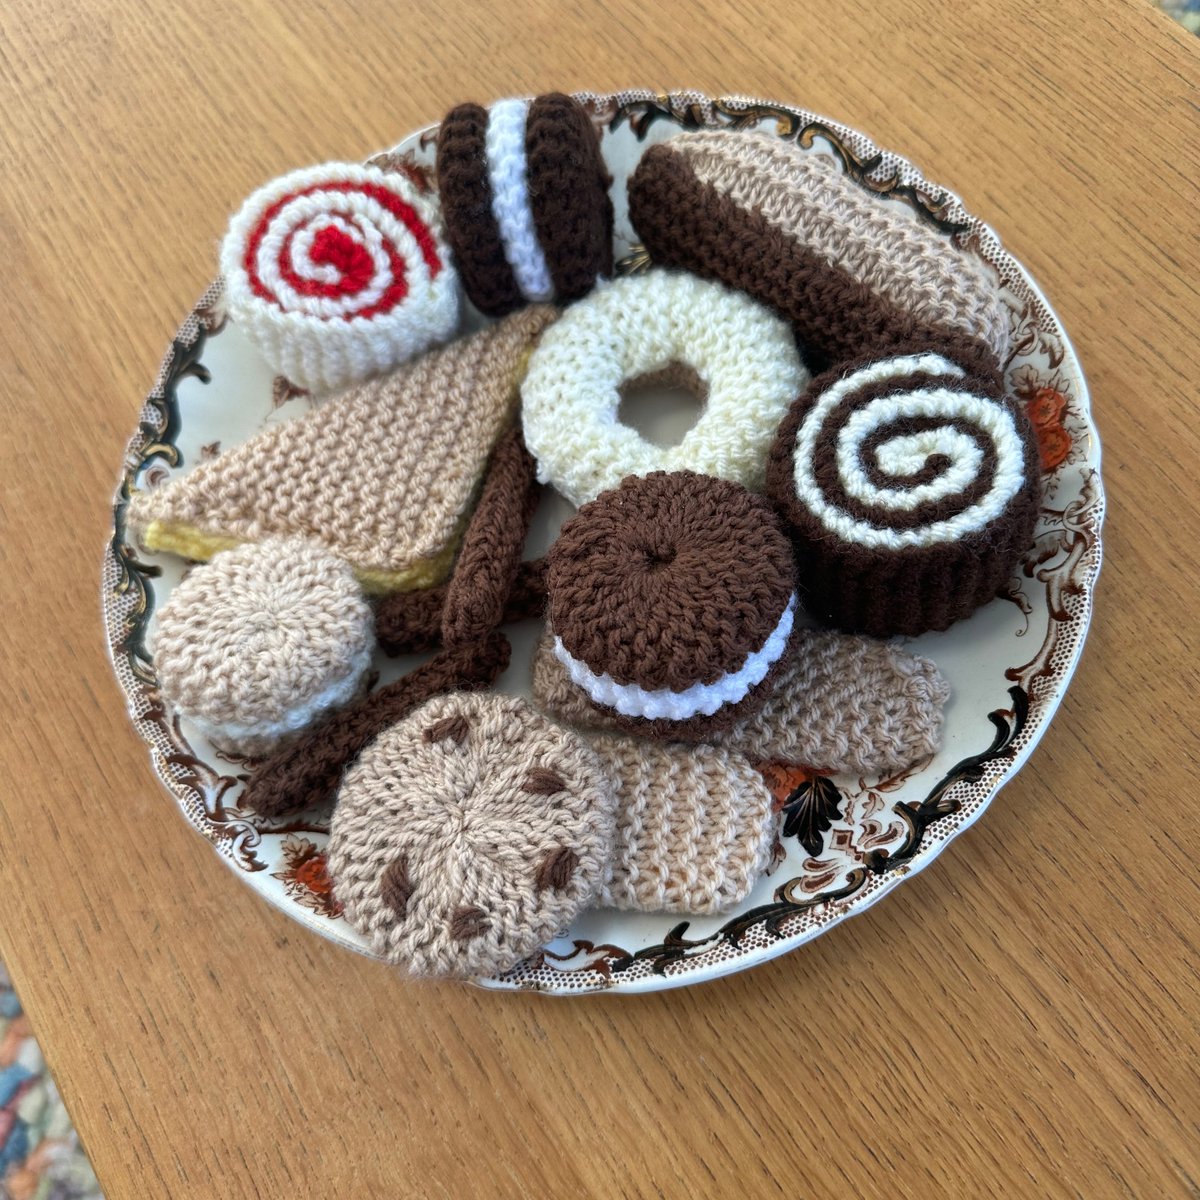 🤩 This is probably the coolest thing we've seen this week - Leigh spotted it in a property that will be coming onto the market soon

🍪 We think it looks good enough to eat....! 

#crochet #spottedinnorwich #estateagent #midweekmotivation